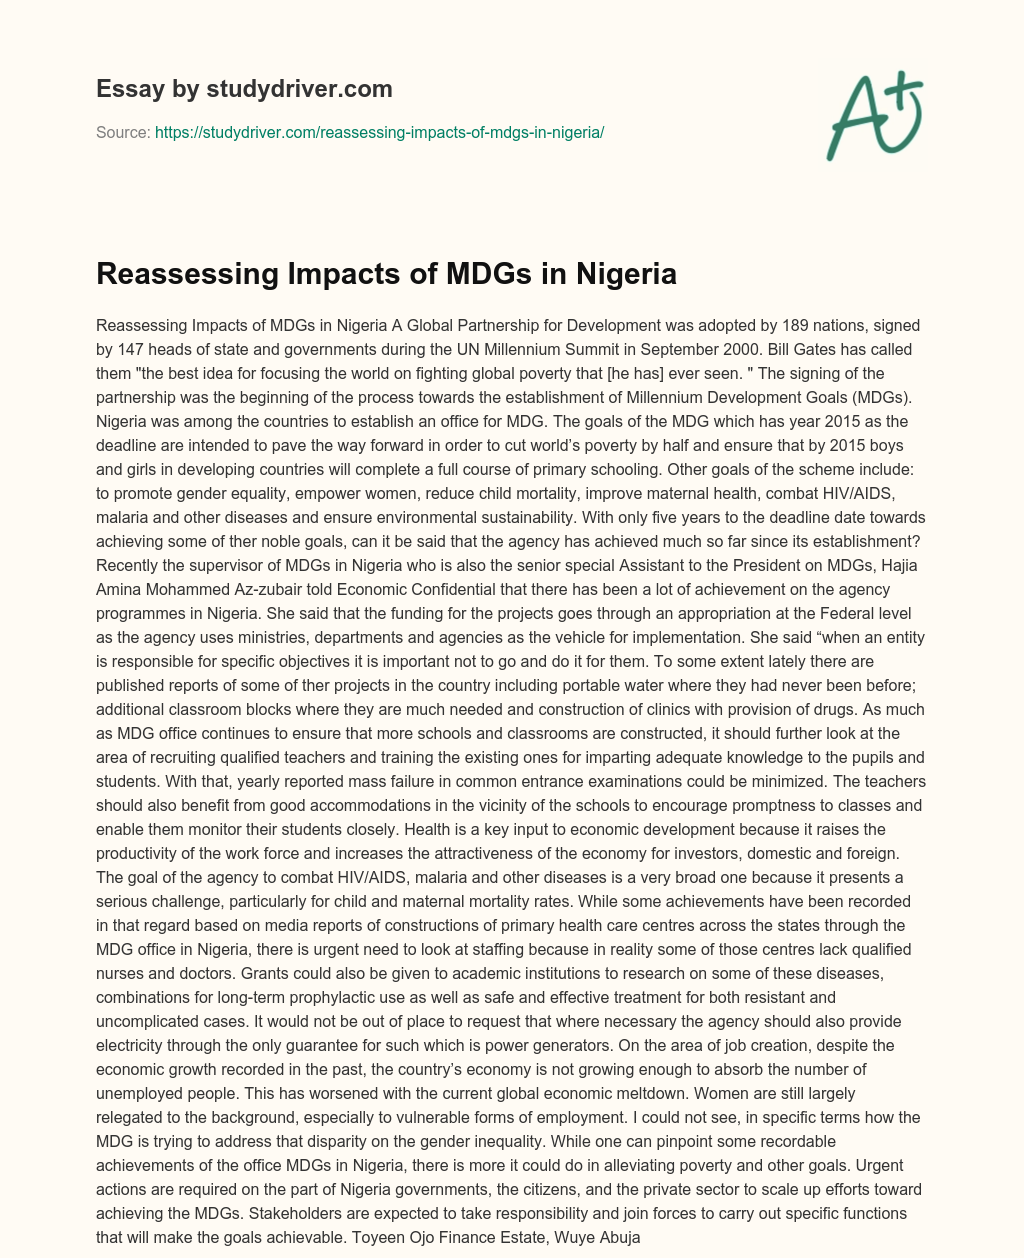 Reassessing Impacts of MDGs in Nigeria essay